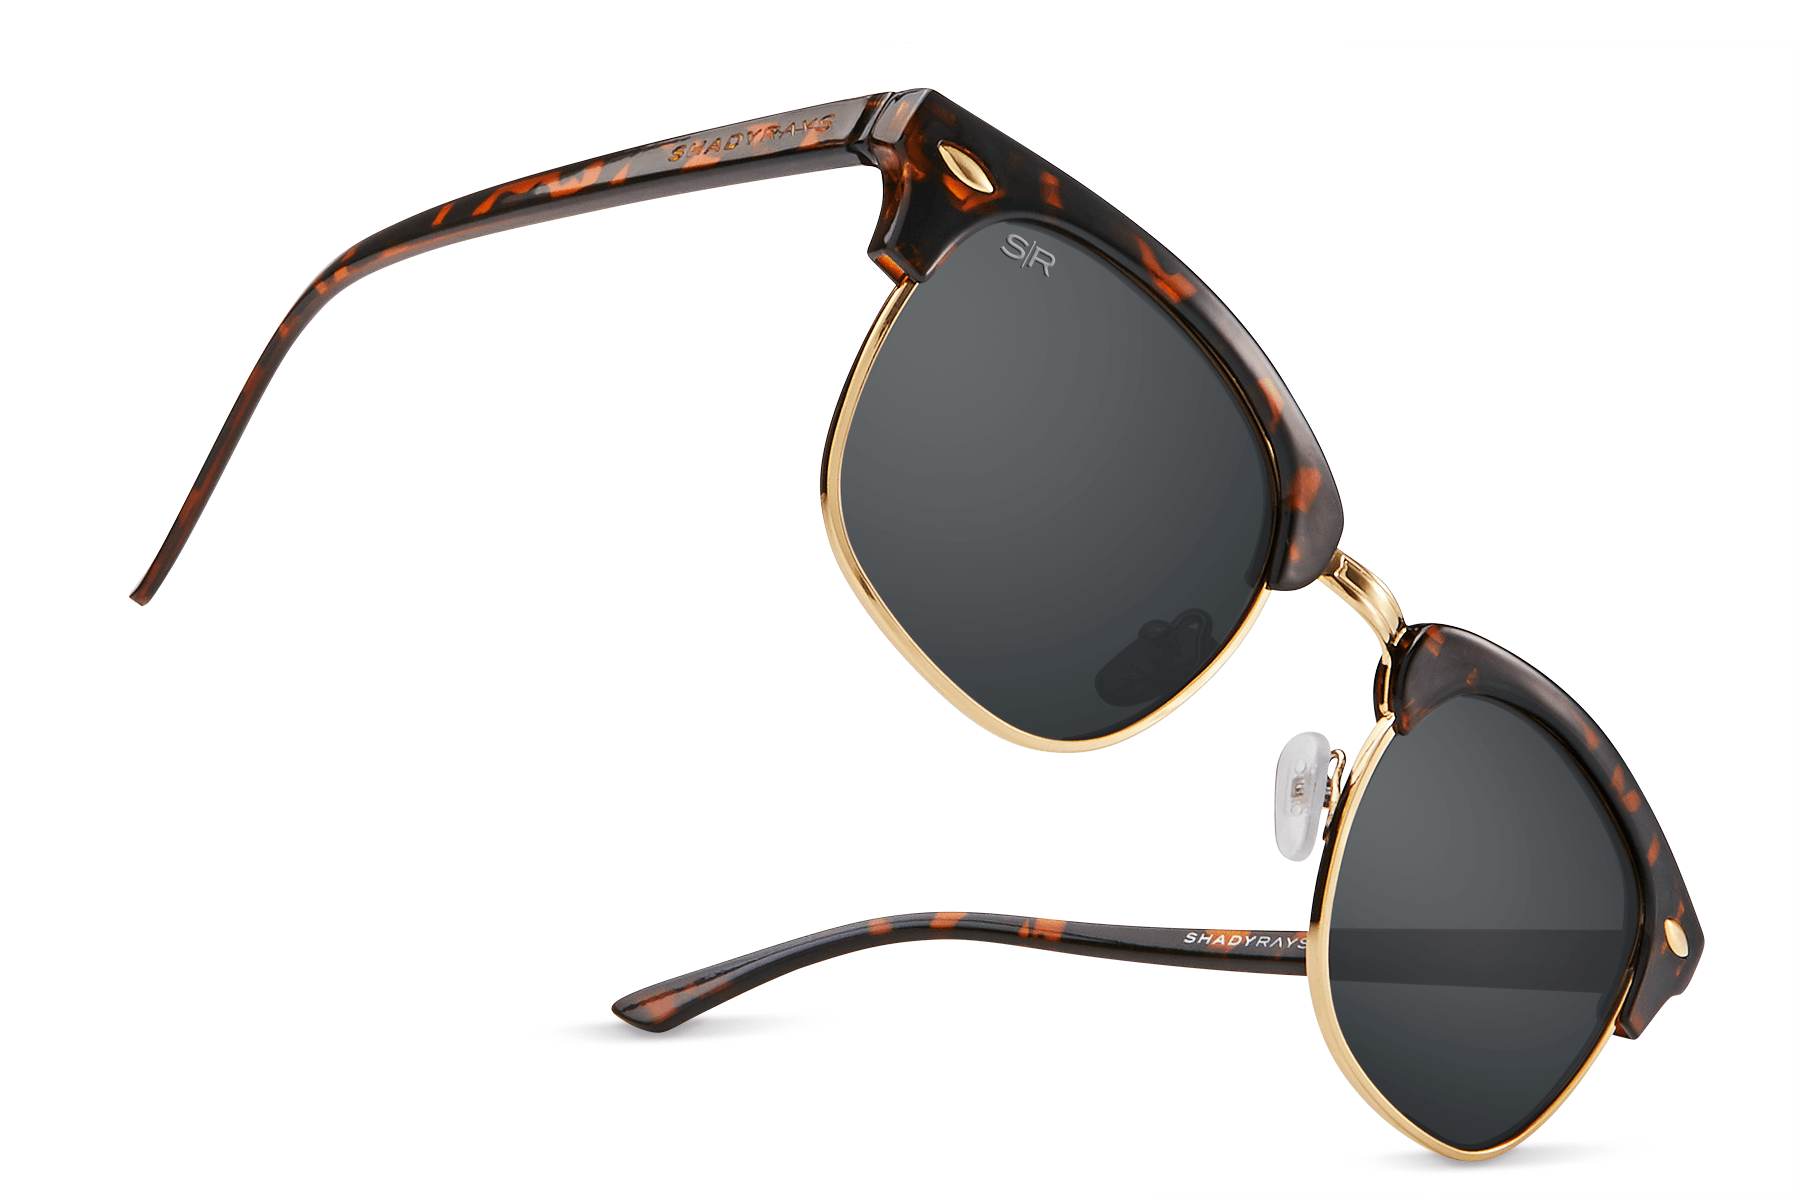 Oakmont - Tortoise Polarized Sunglasses | Tortoise Sunglasses | Best Christmas Gifts | Gifts for The Holidays | Unique Gifts for Friends| Shady Rays